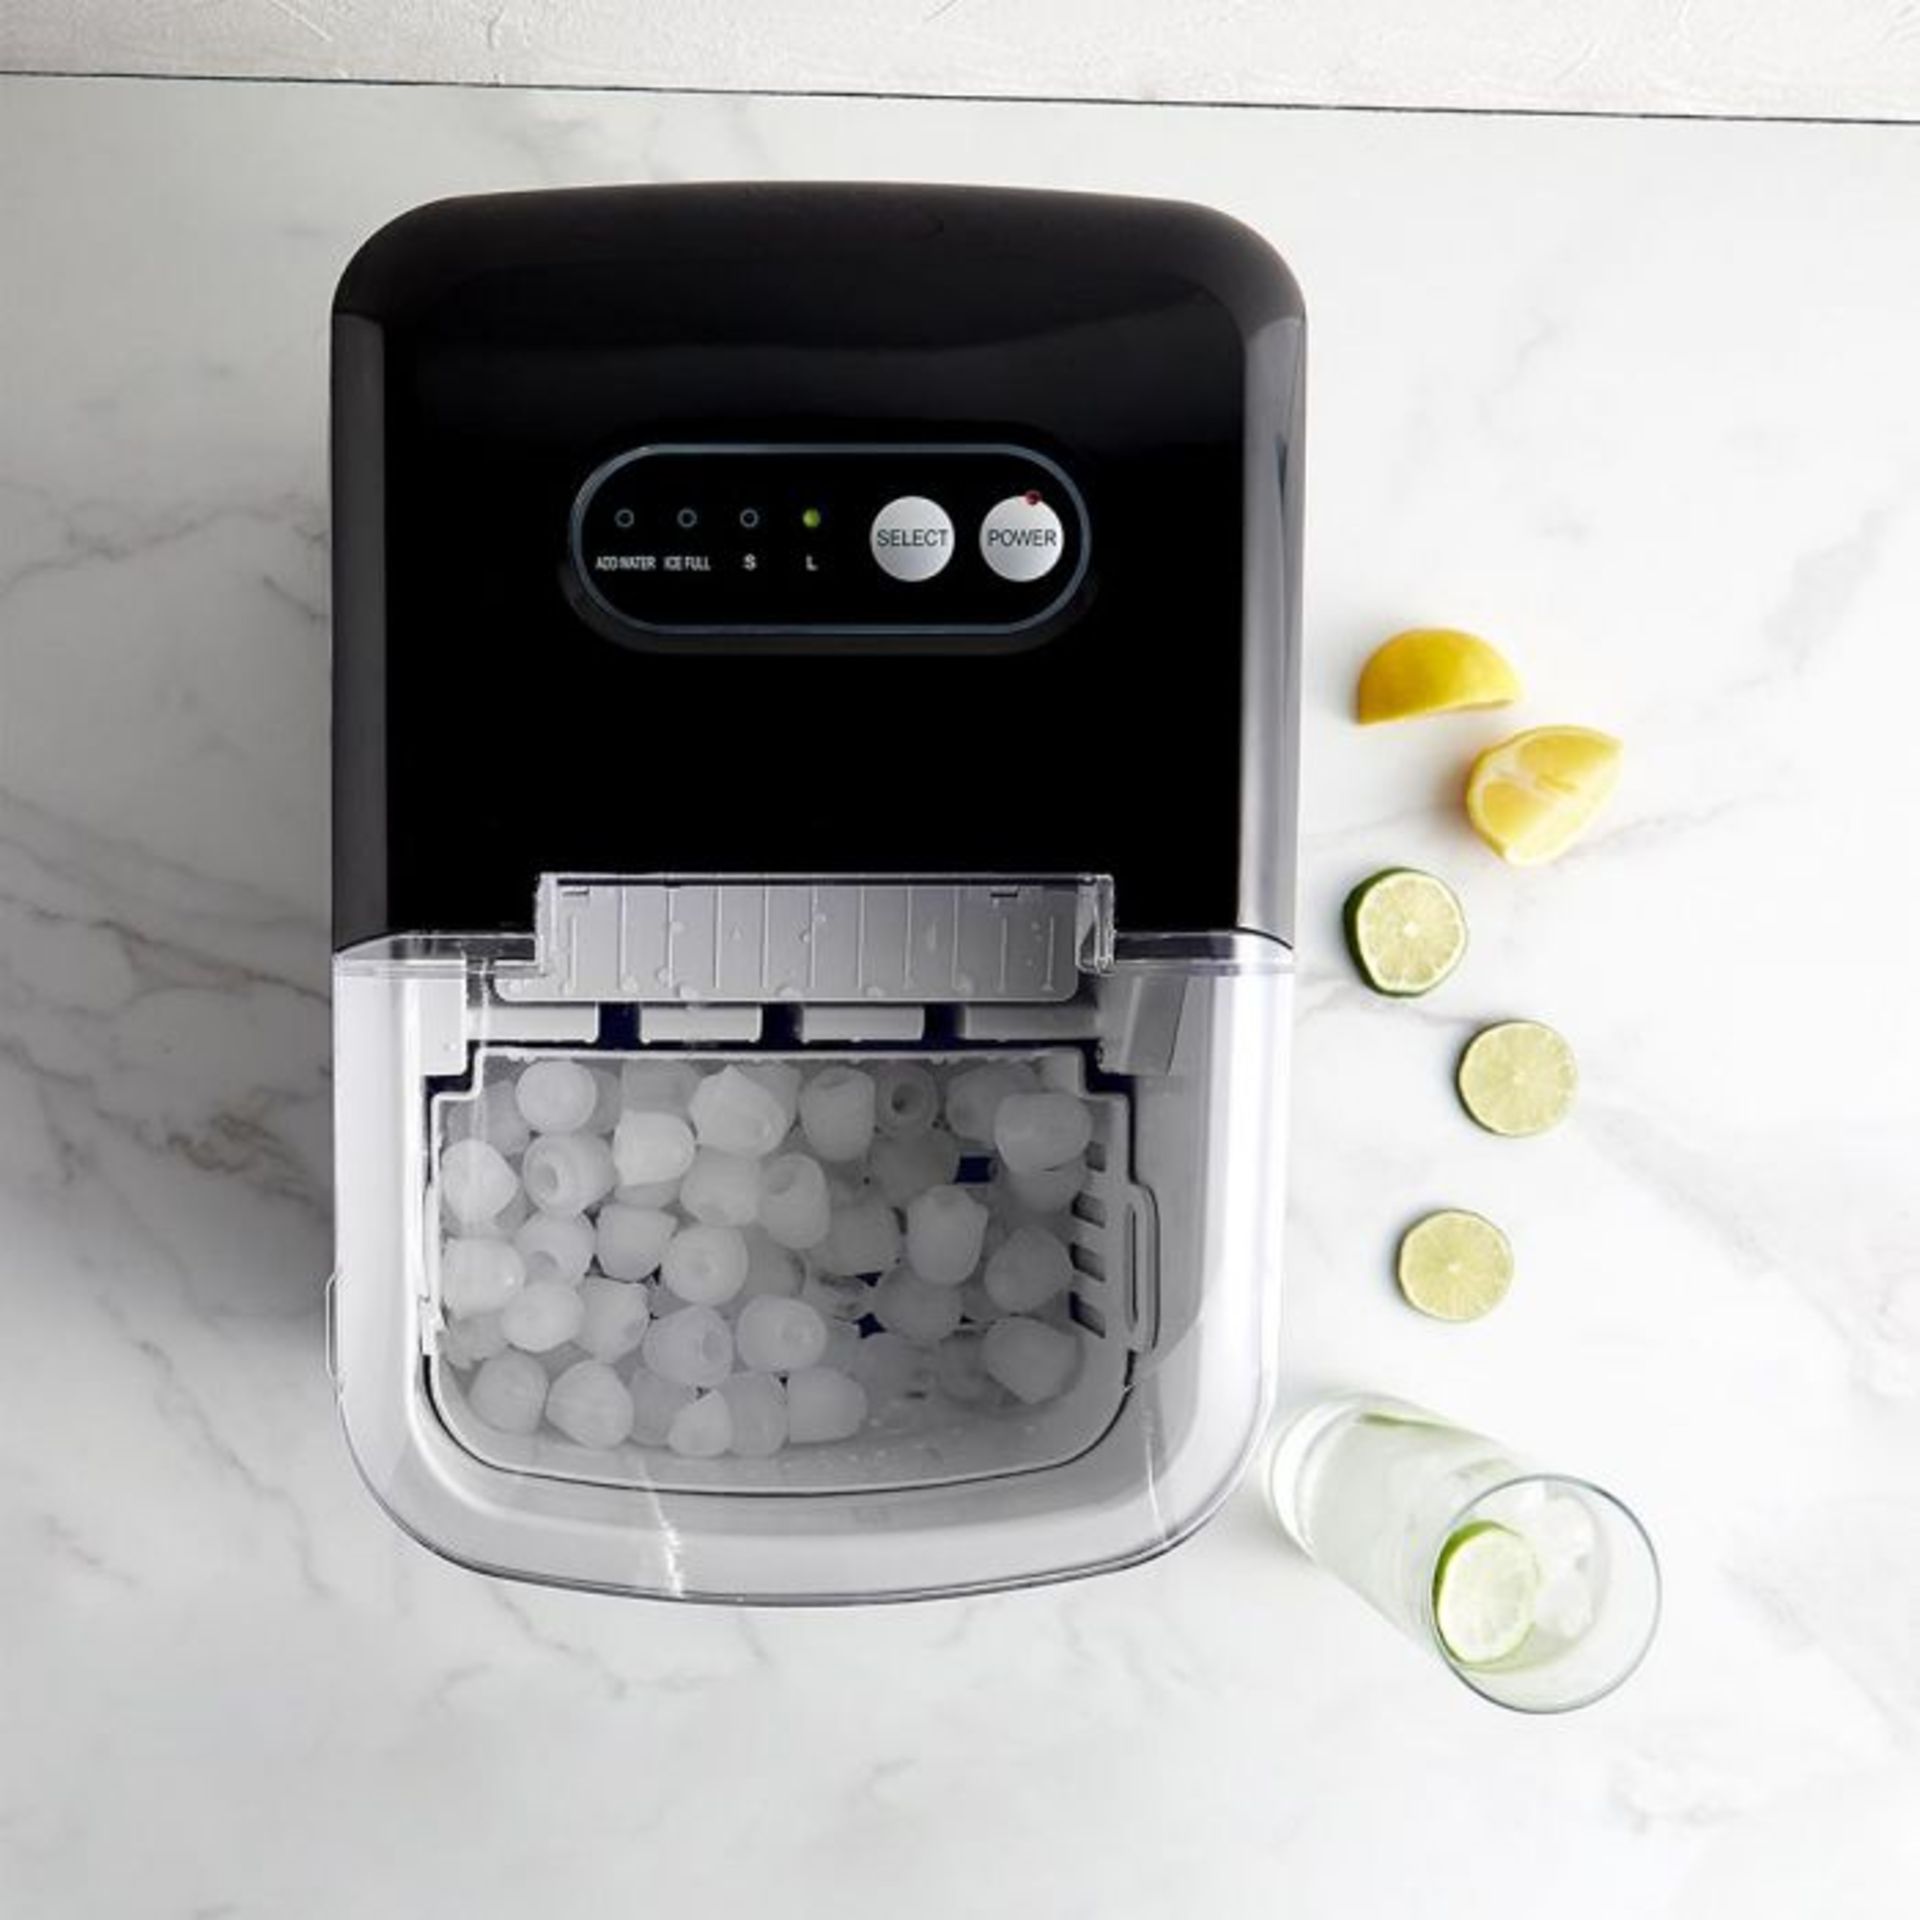 (V30) 2.1L Ice Cube Maker Make up to 72g of ice every 10 minutes thanks to the large 2.1-litre... - Image 2 of 3